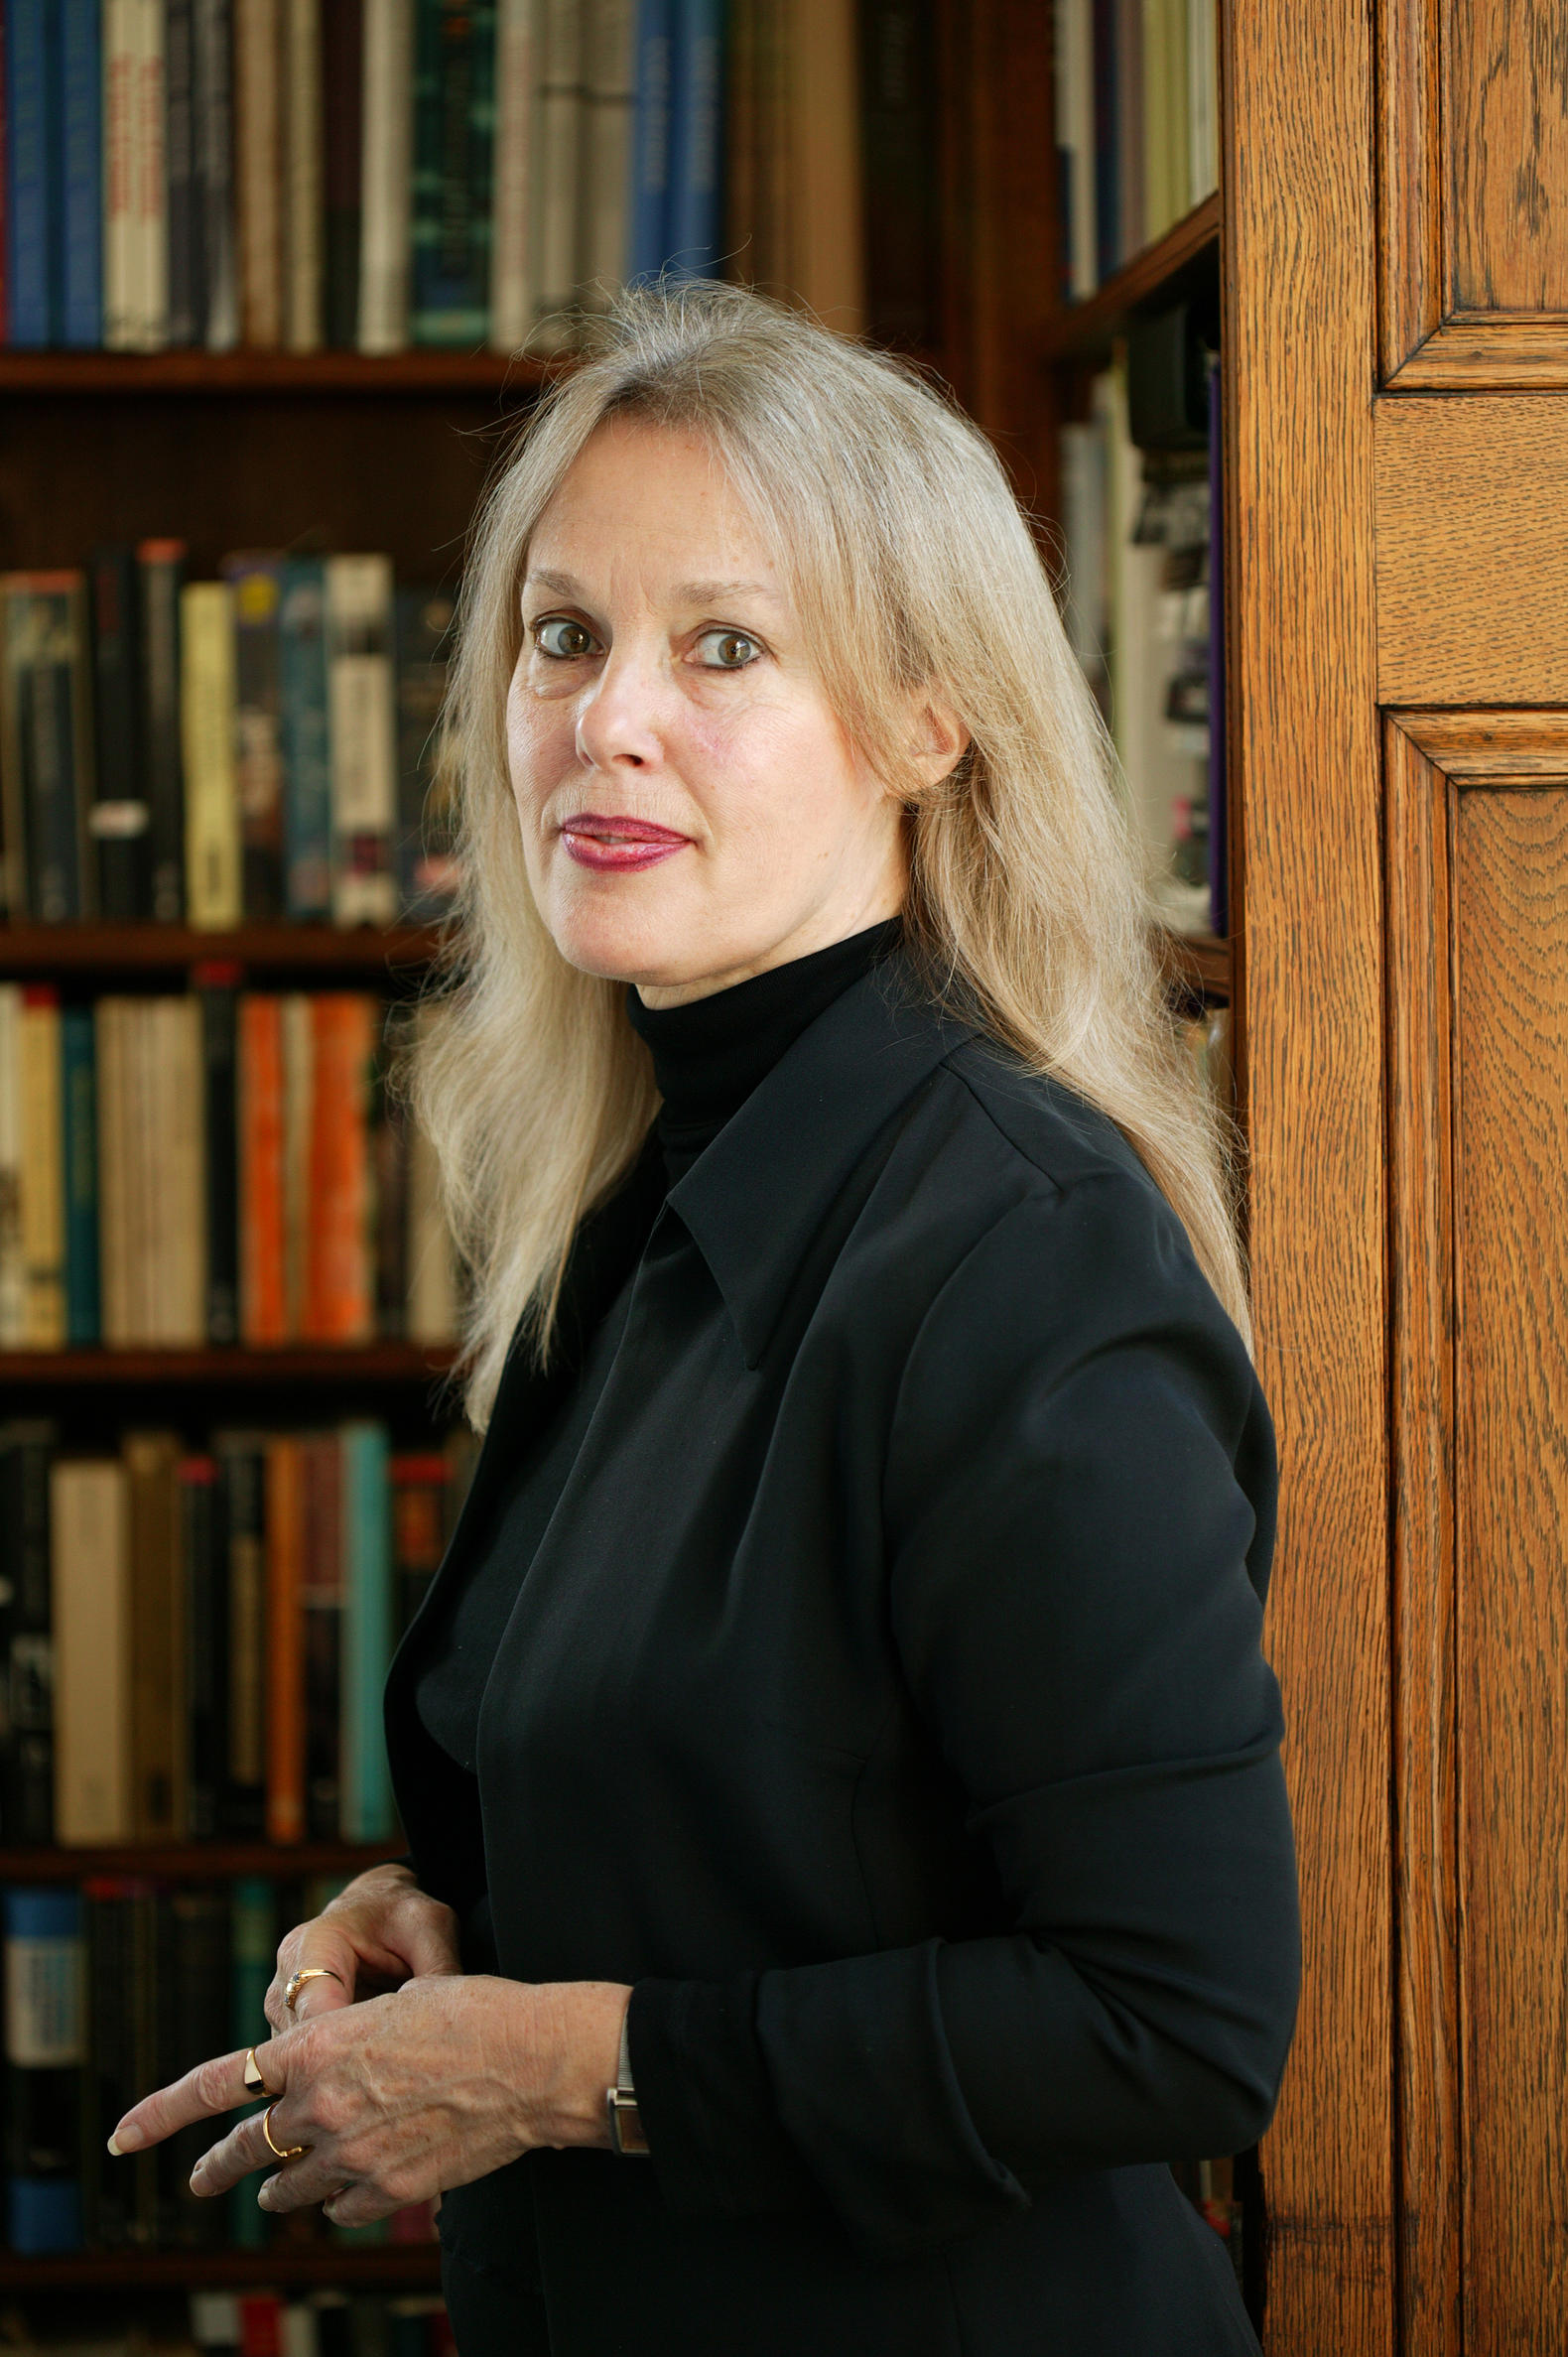 Elaine Scarry is Walter M. Cabot Professor of Aesthetics and General Theory of Value in the Department of English at Harvard University. She is author of On Beauty and Being Just; Rule of Law, Misrule of Men; and Thinking in an Emergency.